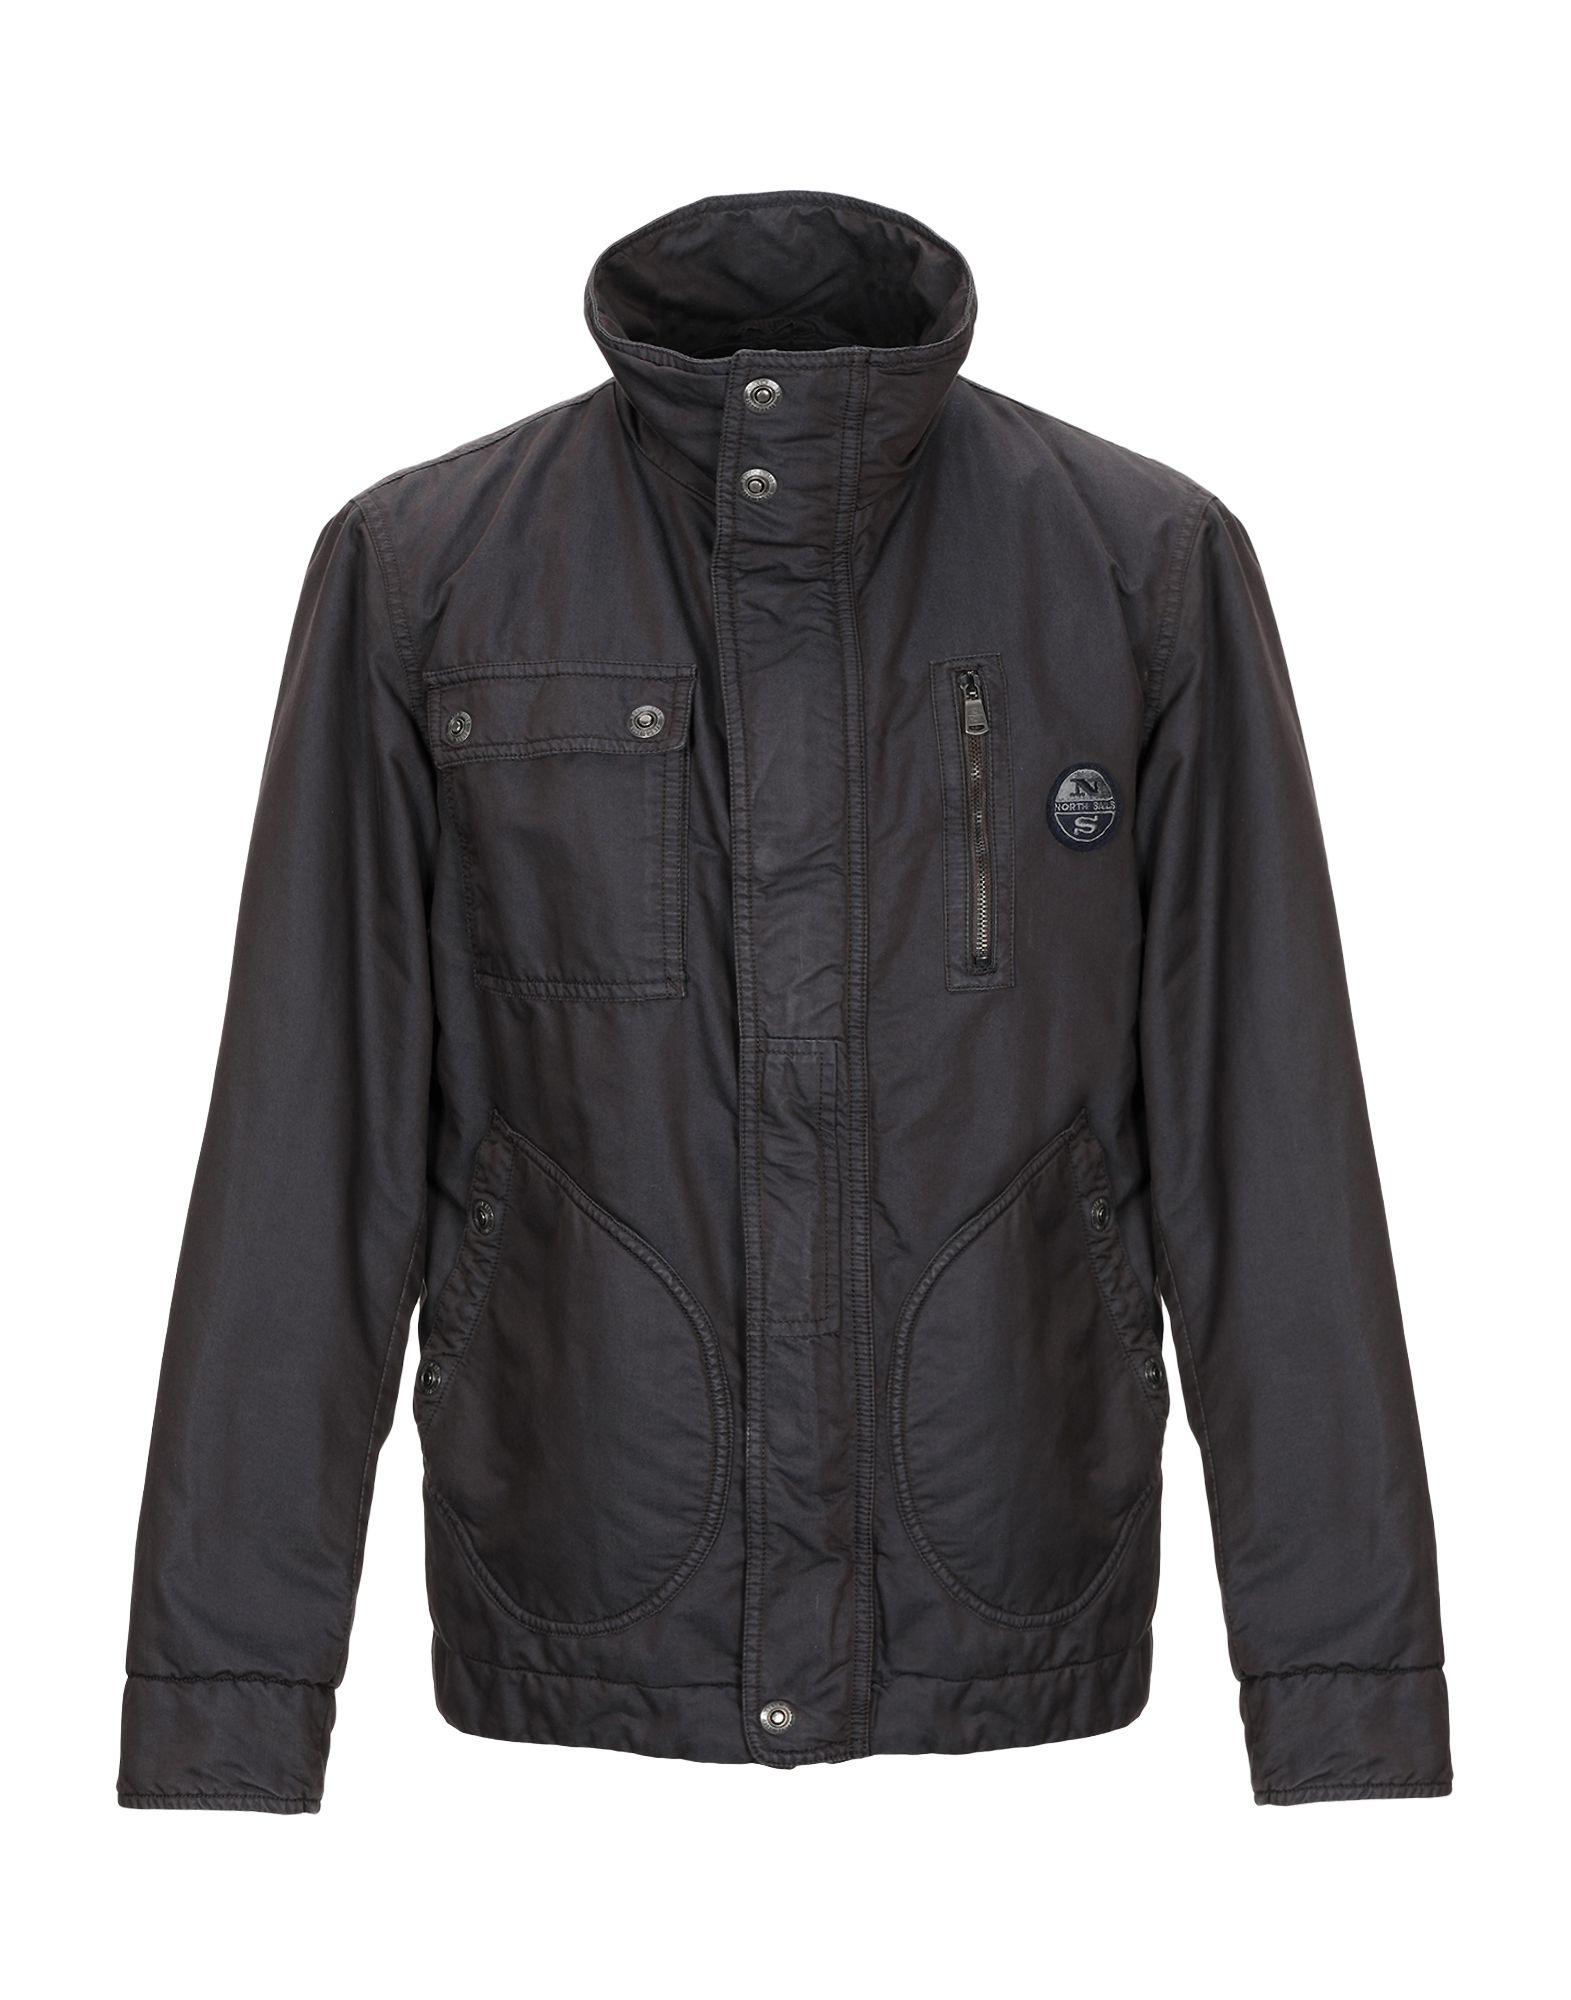 North Sails Jacket in Brown for Men - Lyst